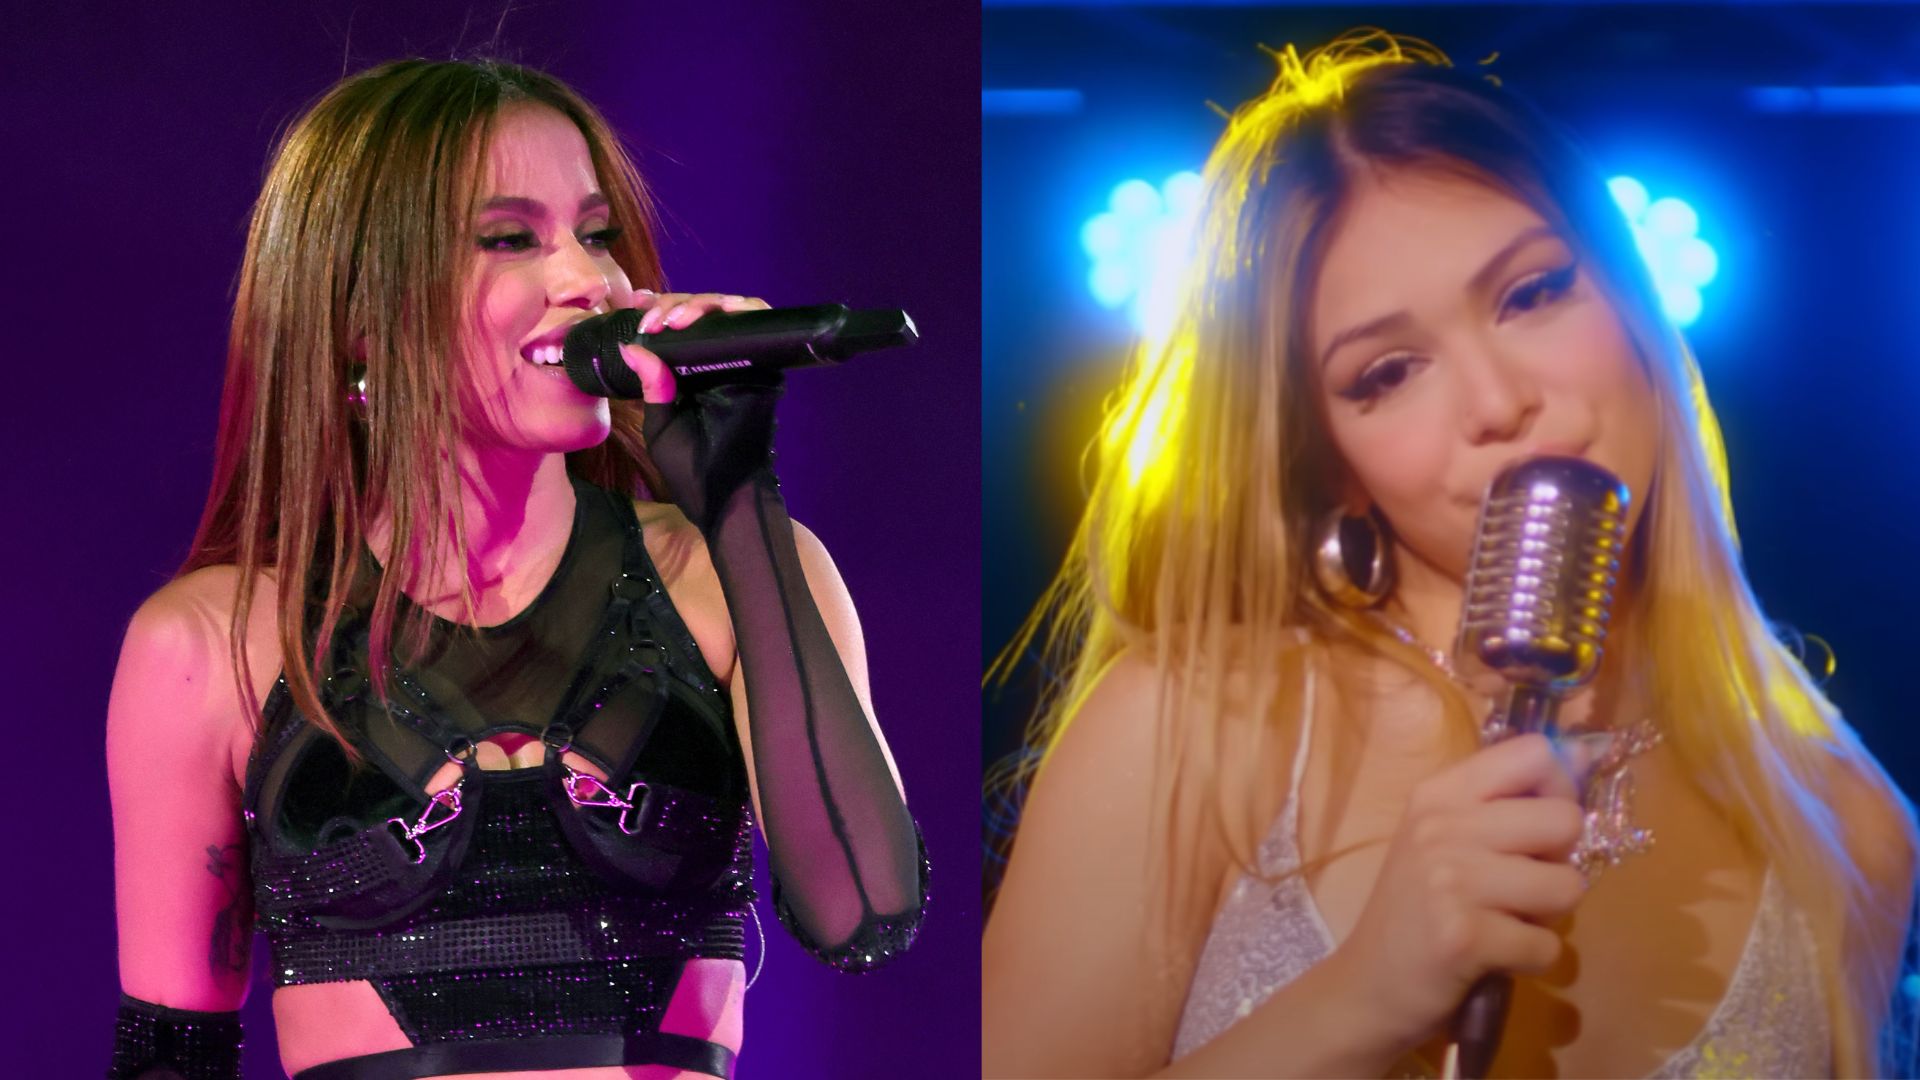 He went out!  Anitta and Melody combine funk and bass in a powerful remix of the anthem “Mil Veces”;  He listens!